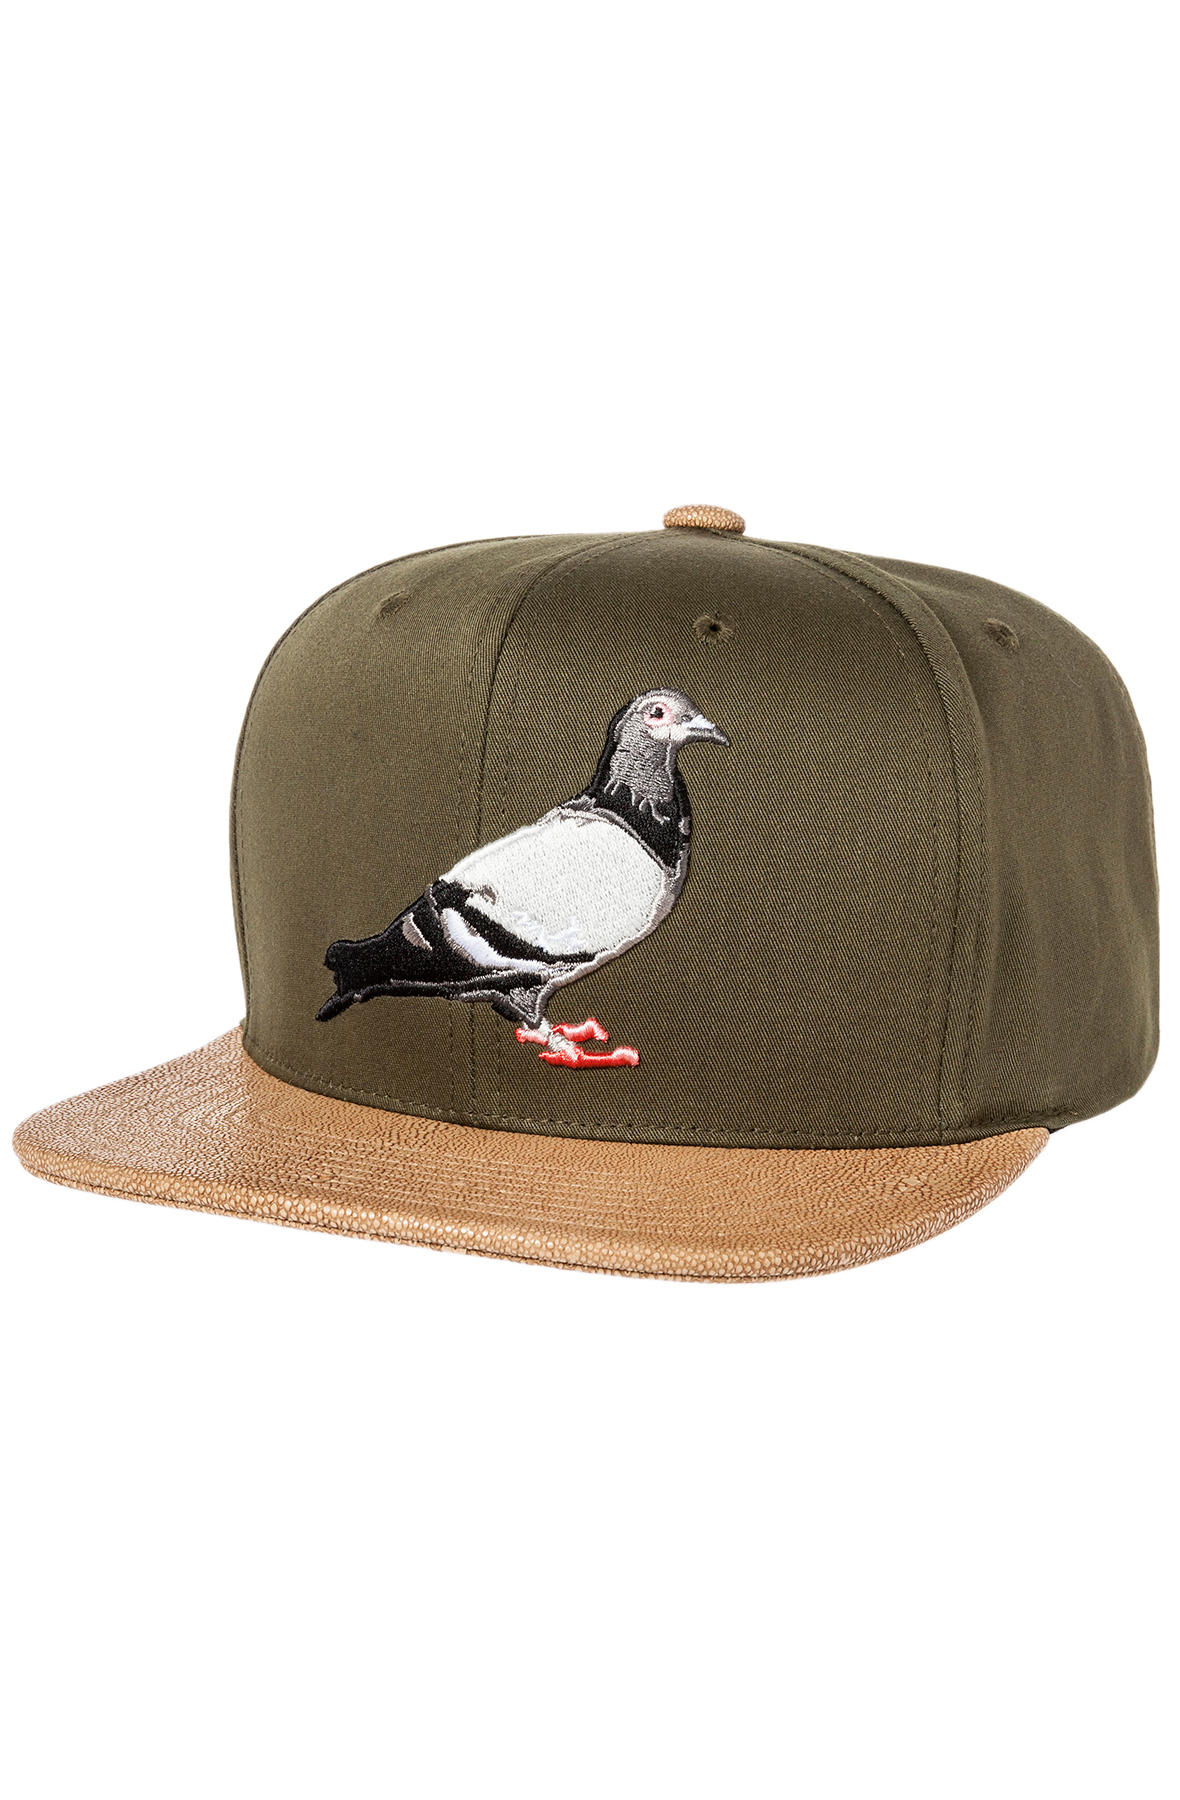 Staple The X Mitchell Ness 2 Tone Pigeon Snapback Hat in Olive (Green ...